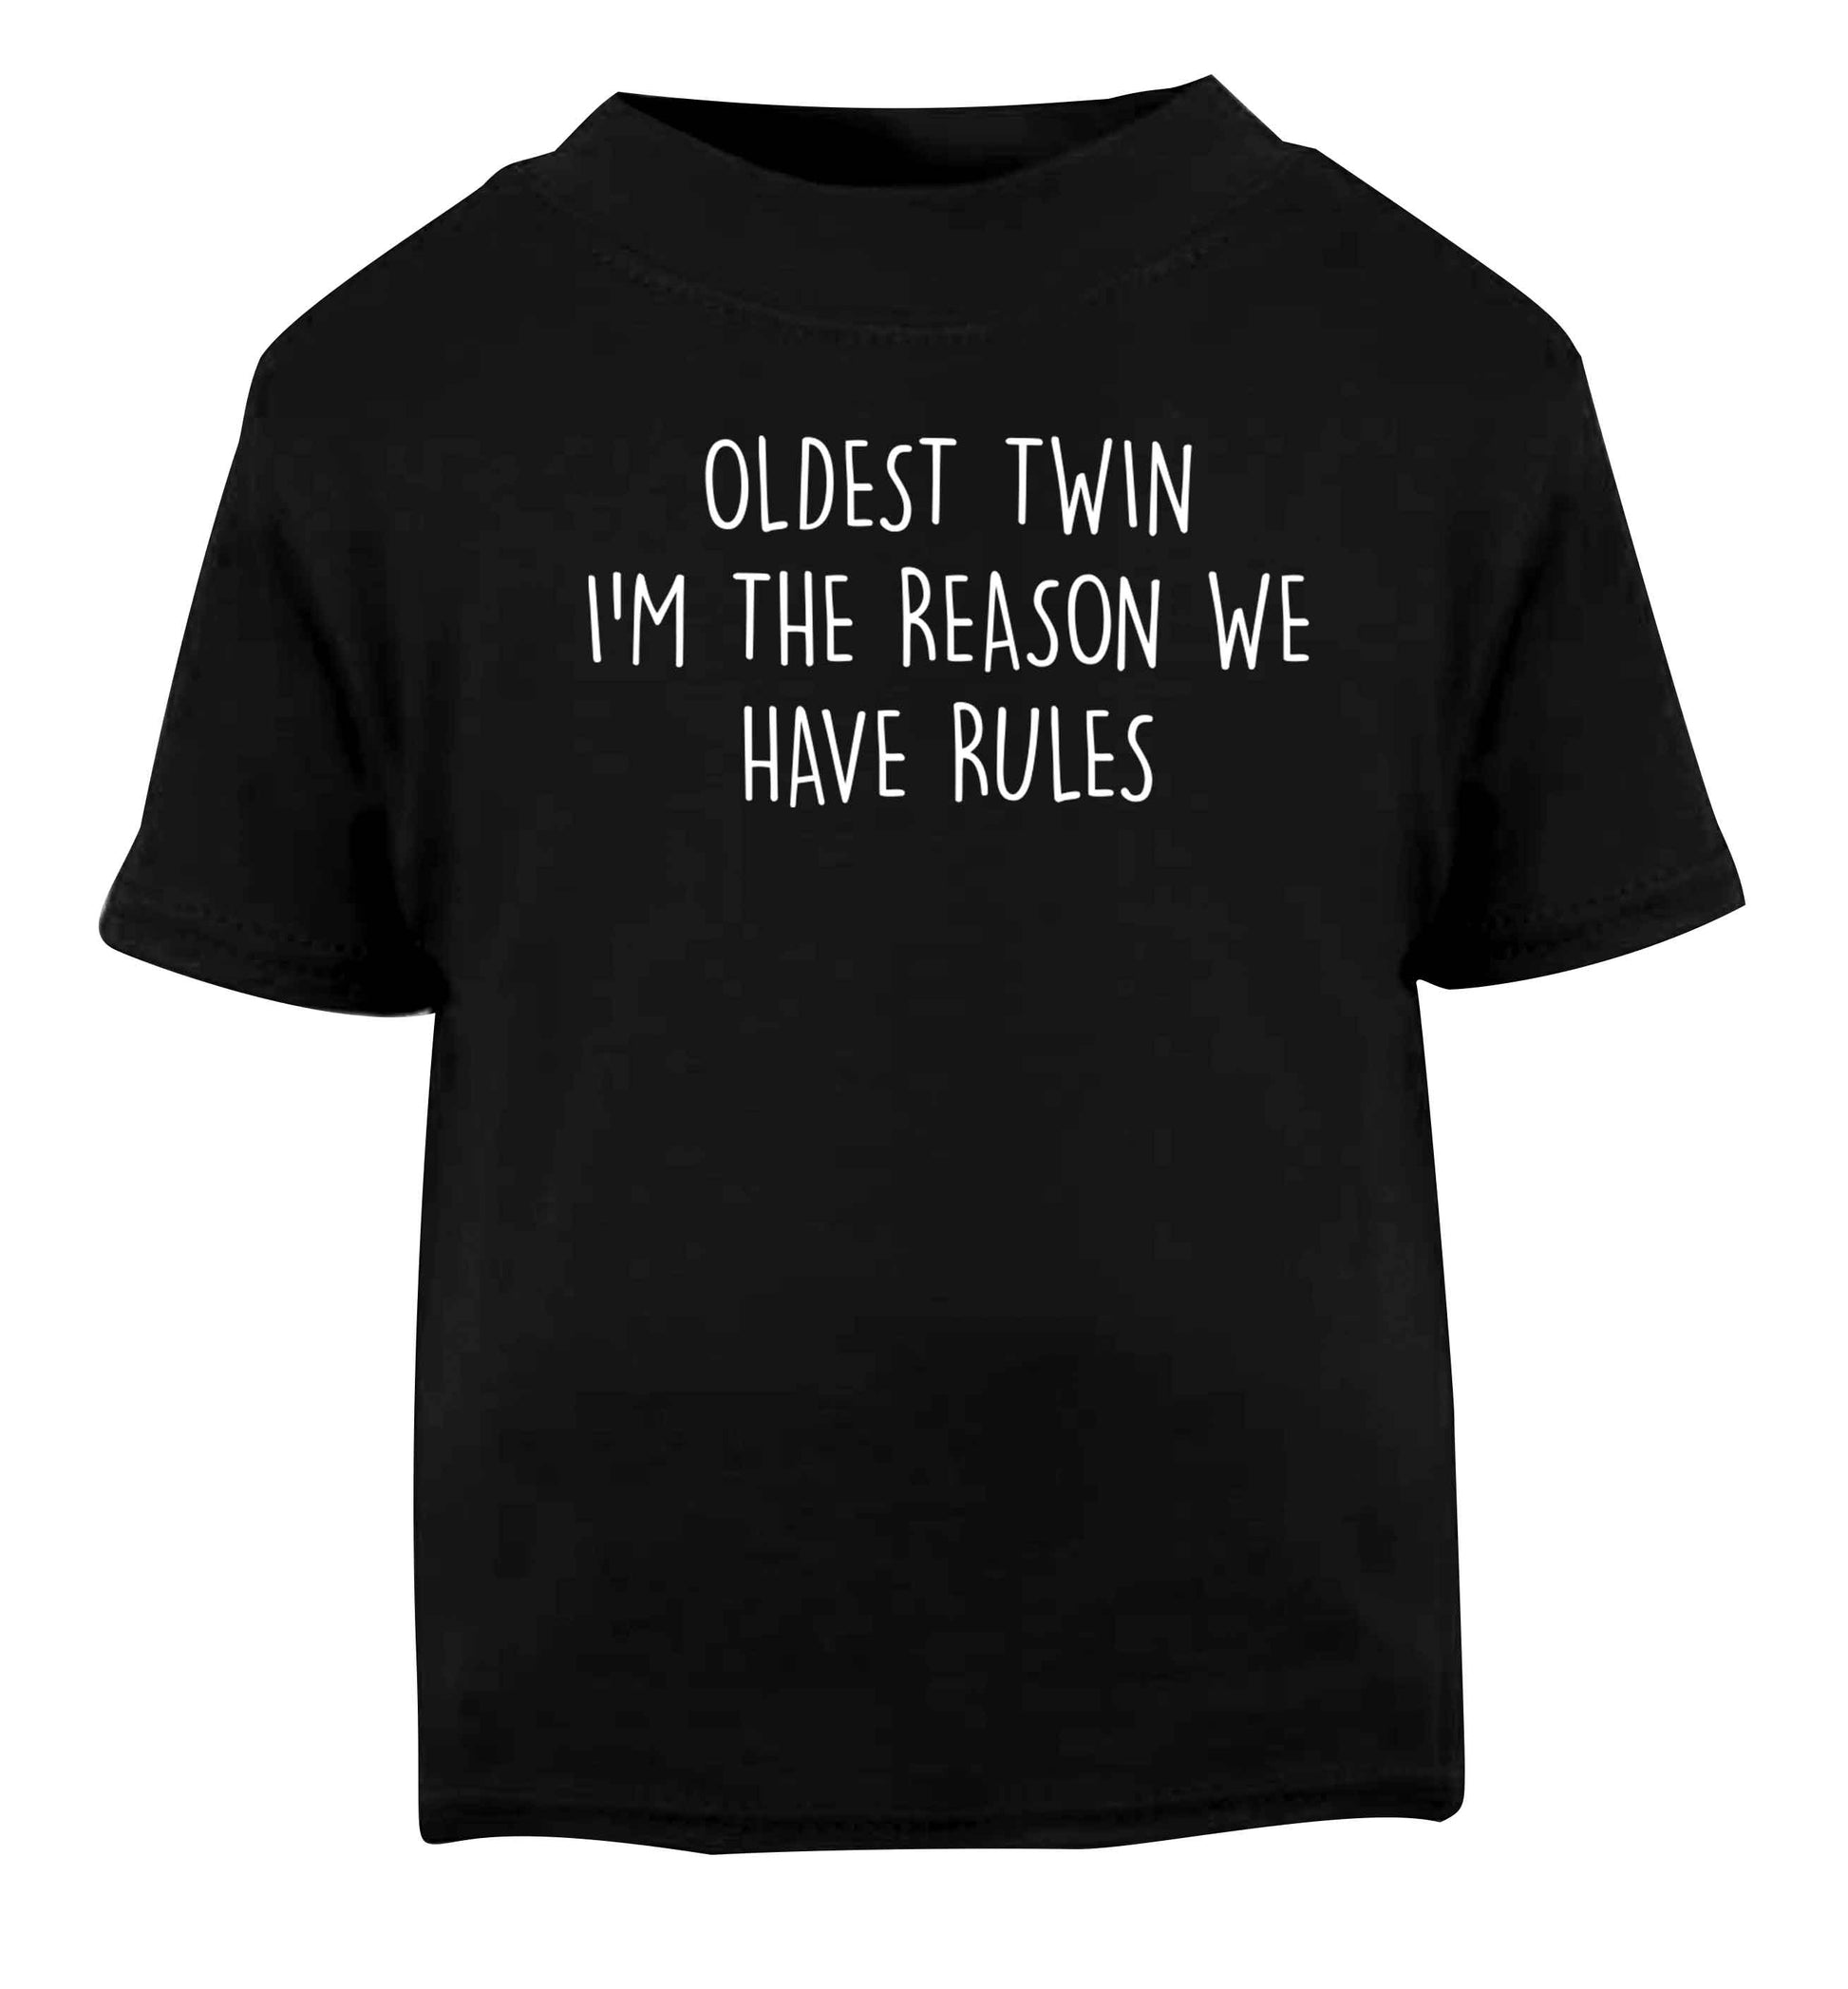 Oldest twin I'm the reason we have rules Black baby toddler Tshirt 2 years